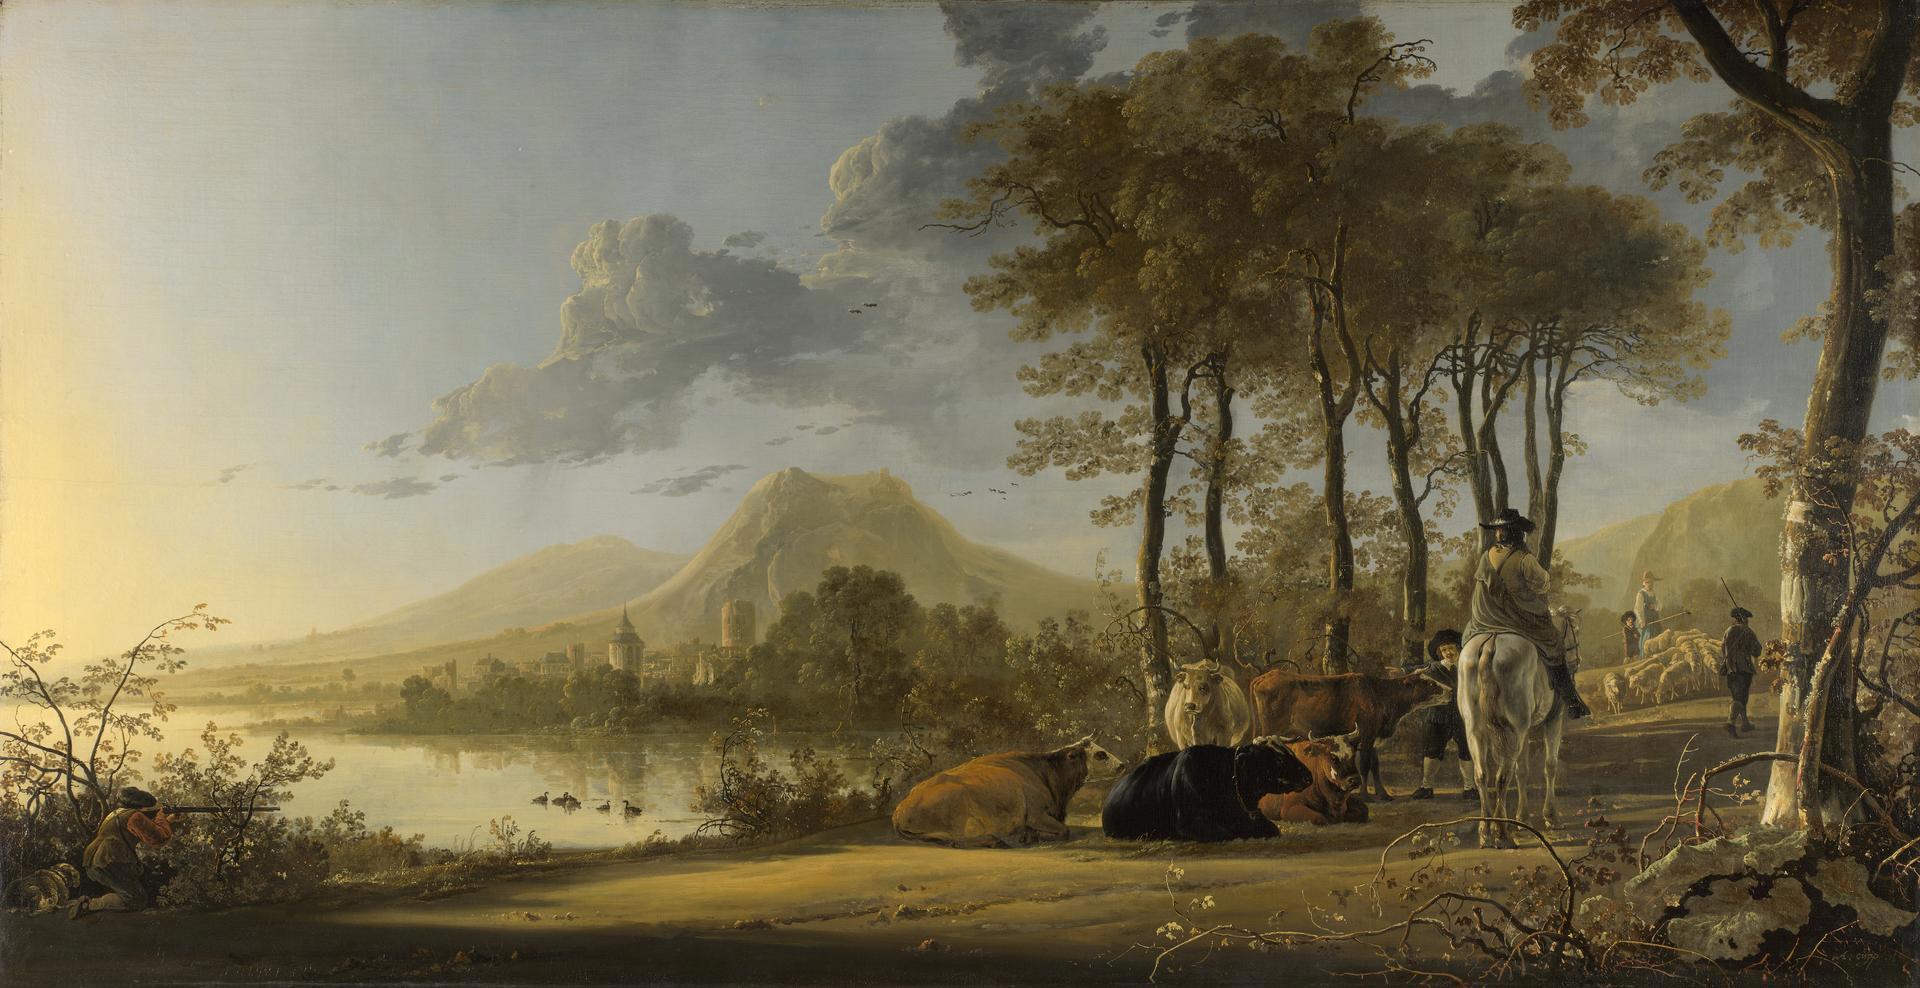 River Landscape with Horseman and Peasants by Aelbert Cuyp